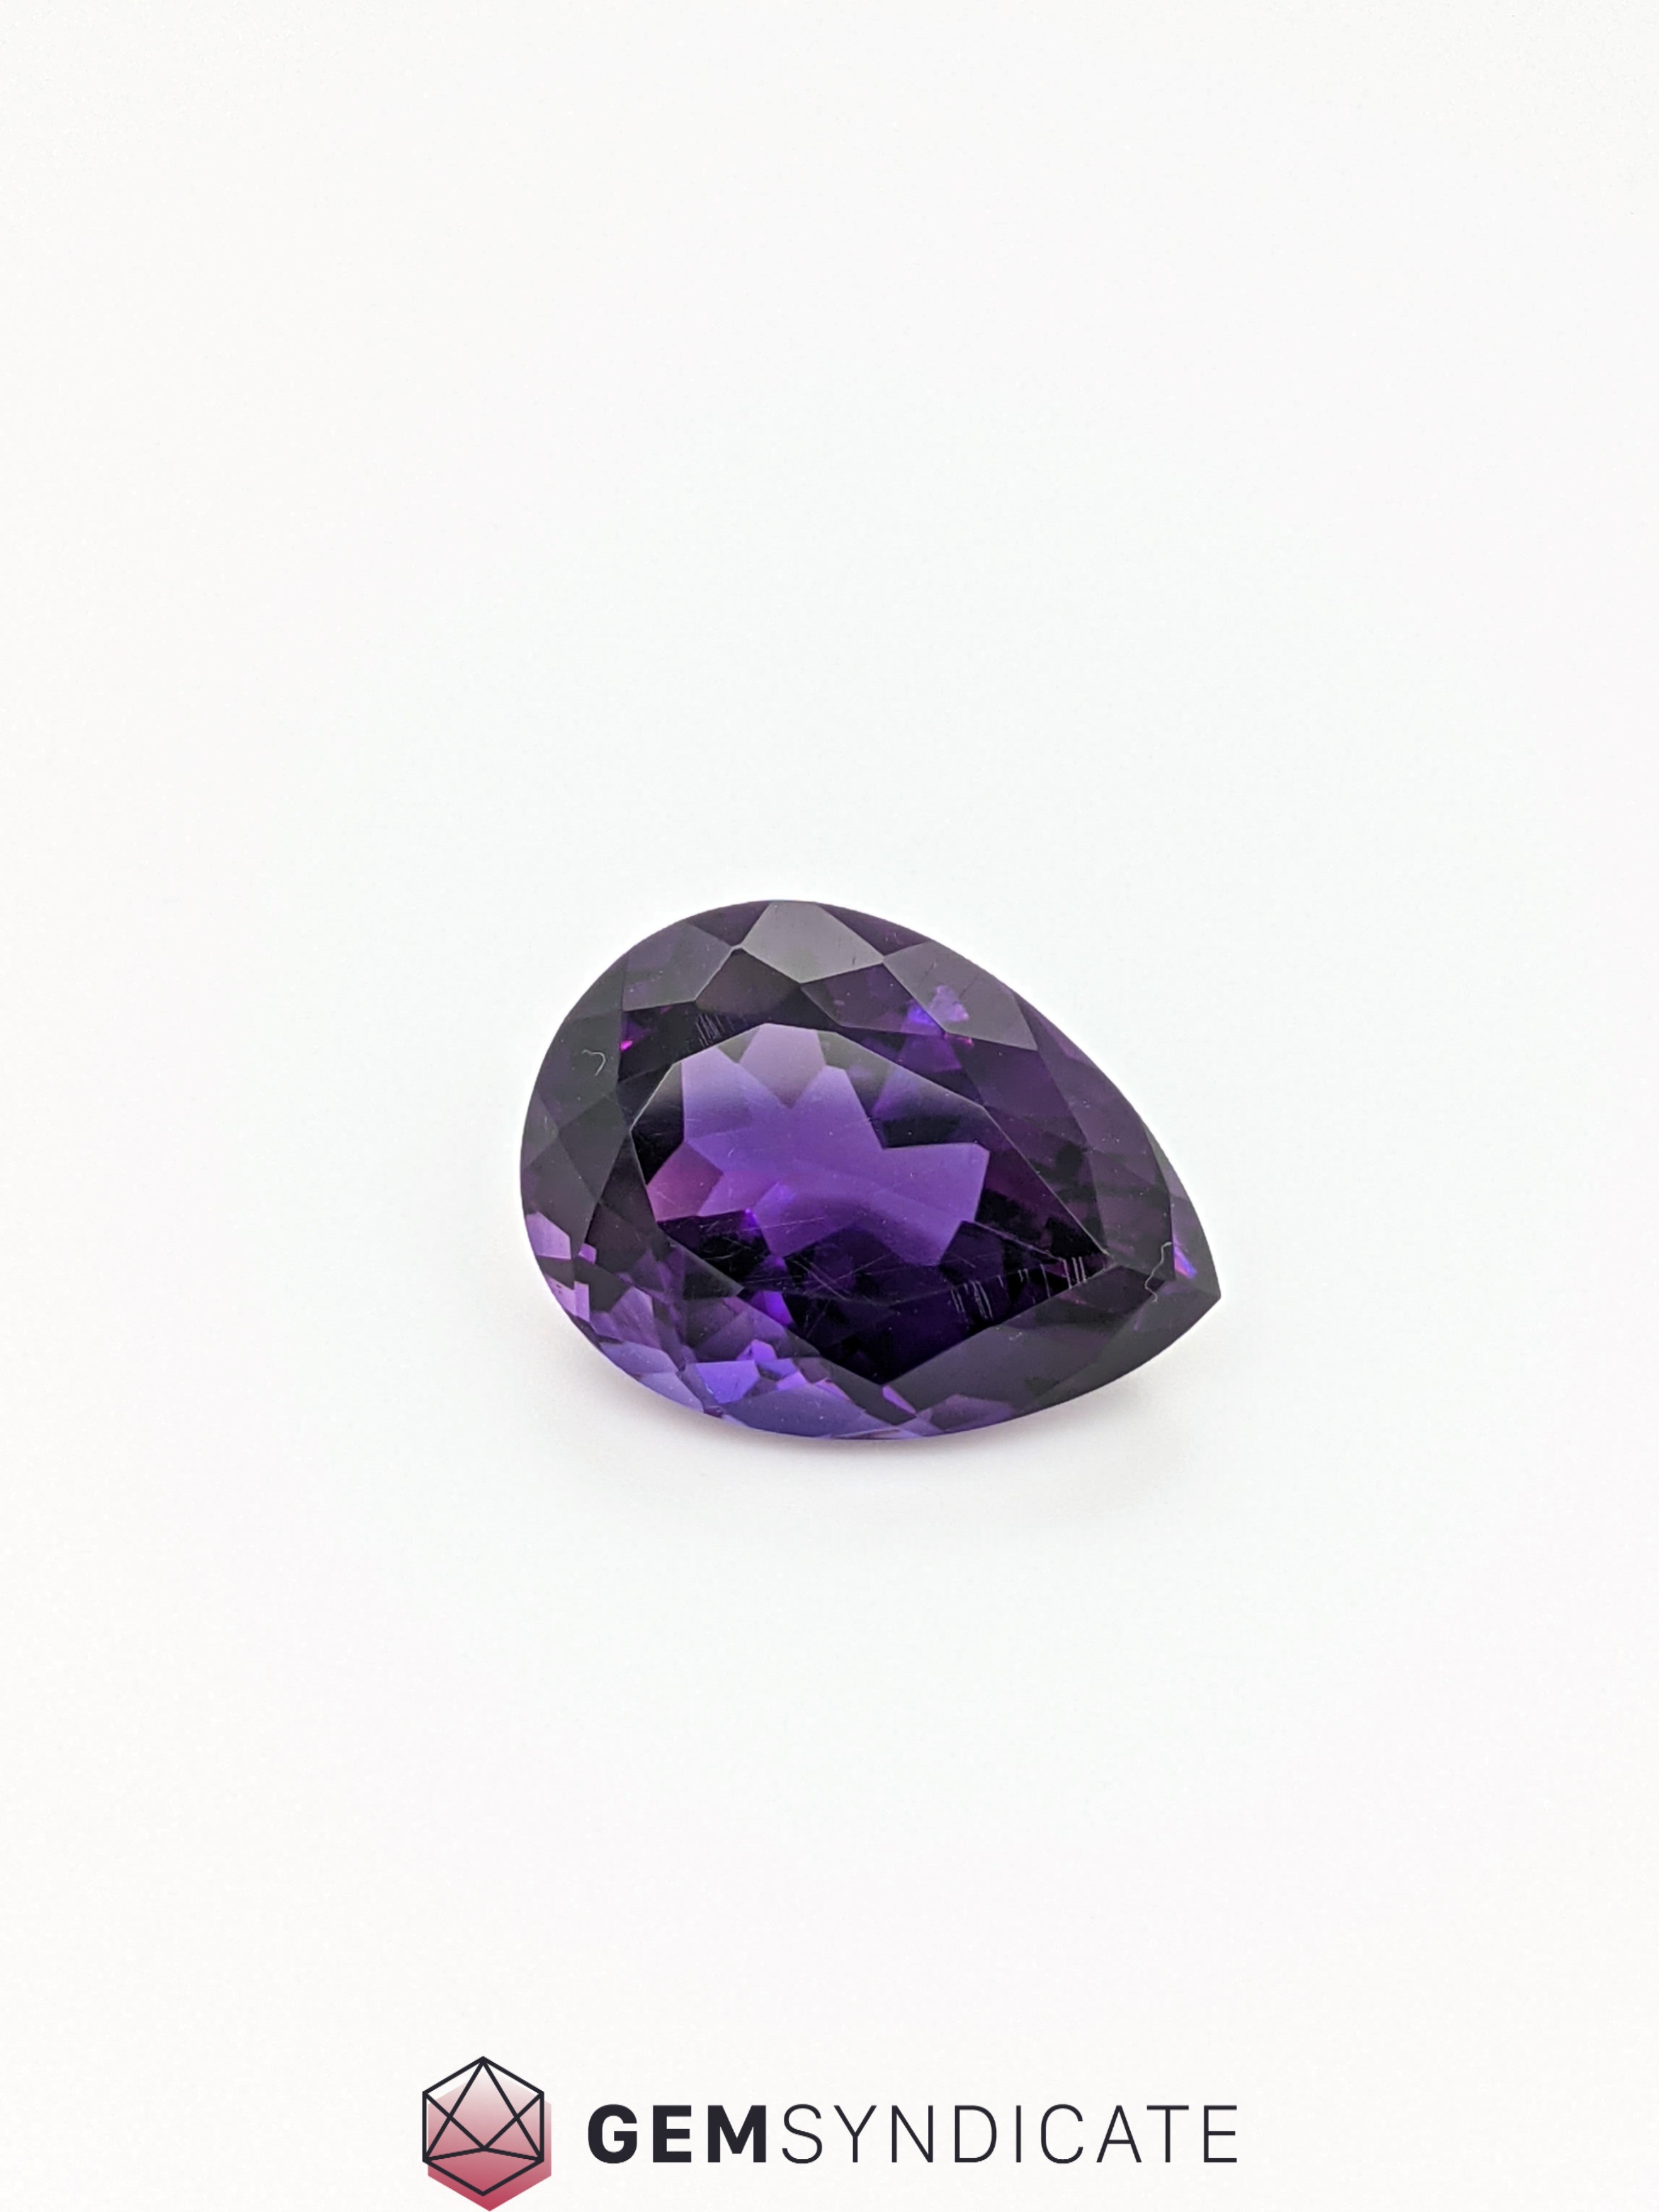 Exquisite Pear Shaped Purple Amethyst 13.64ct